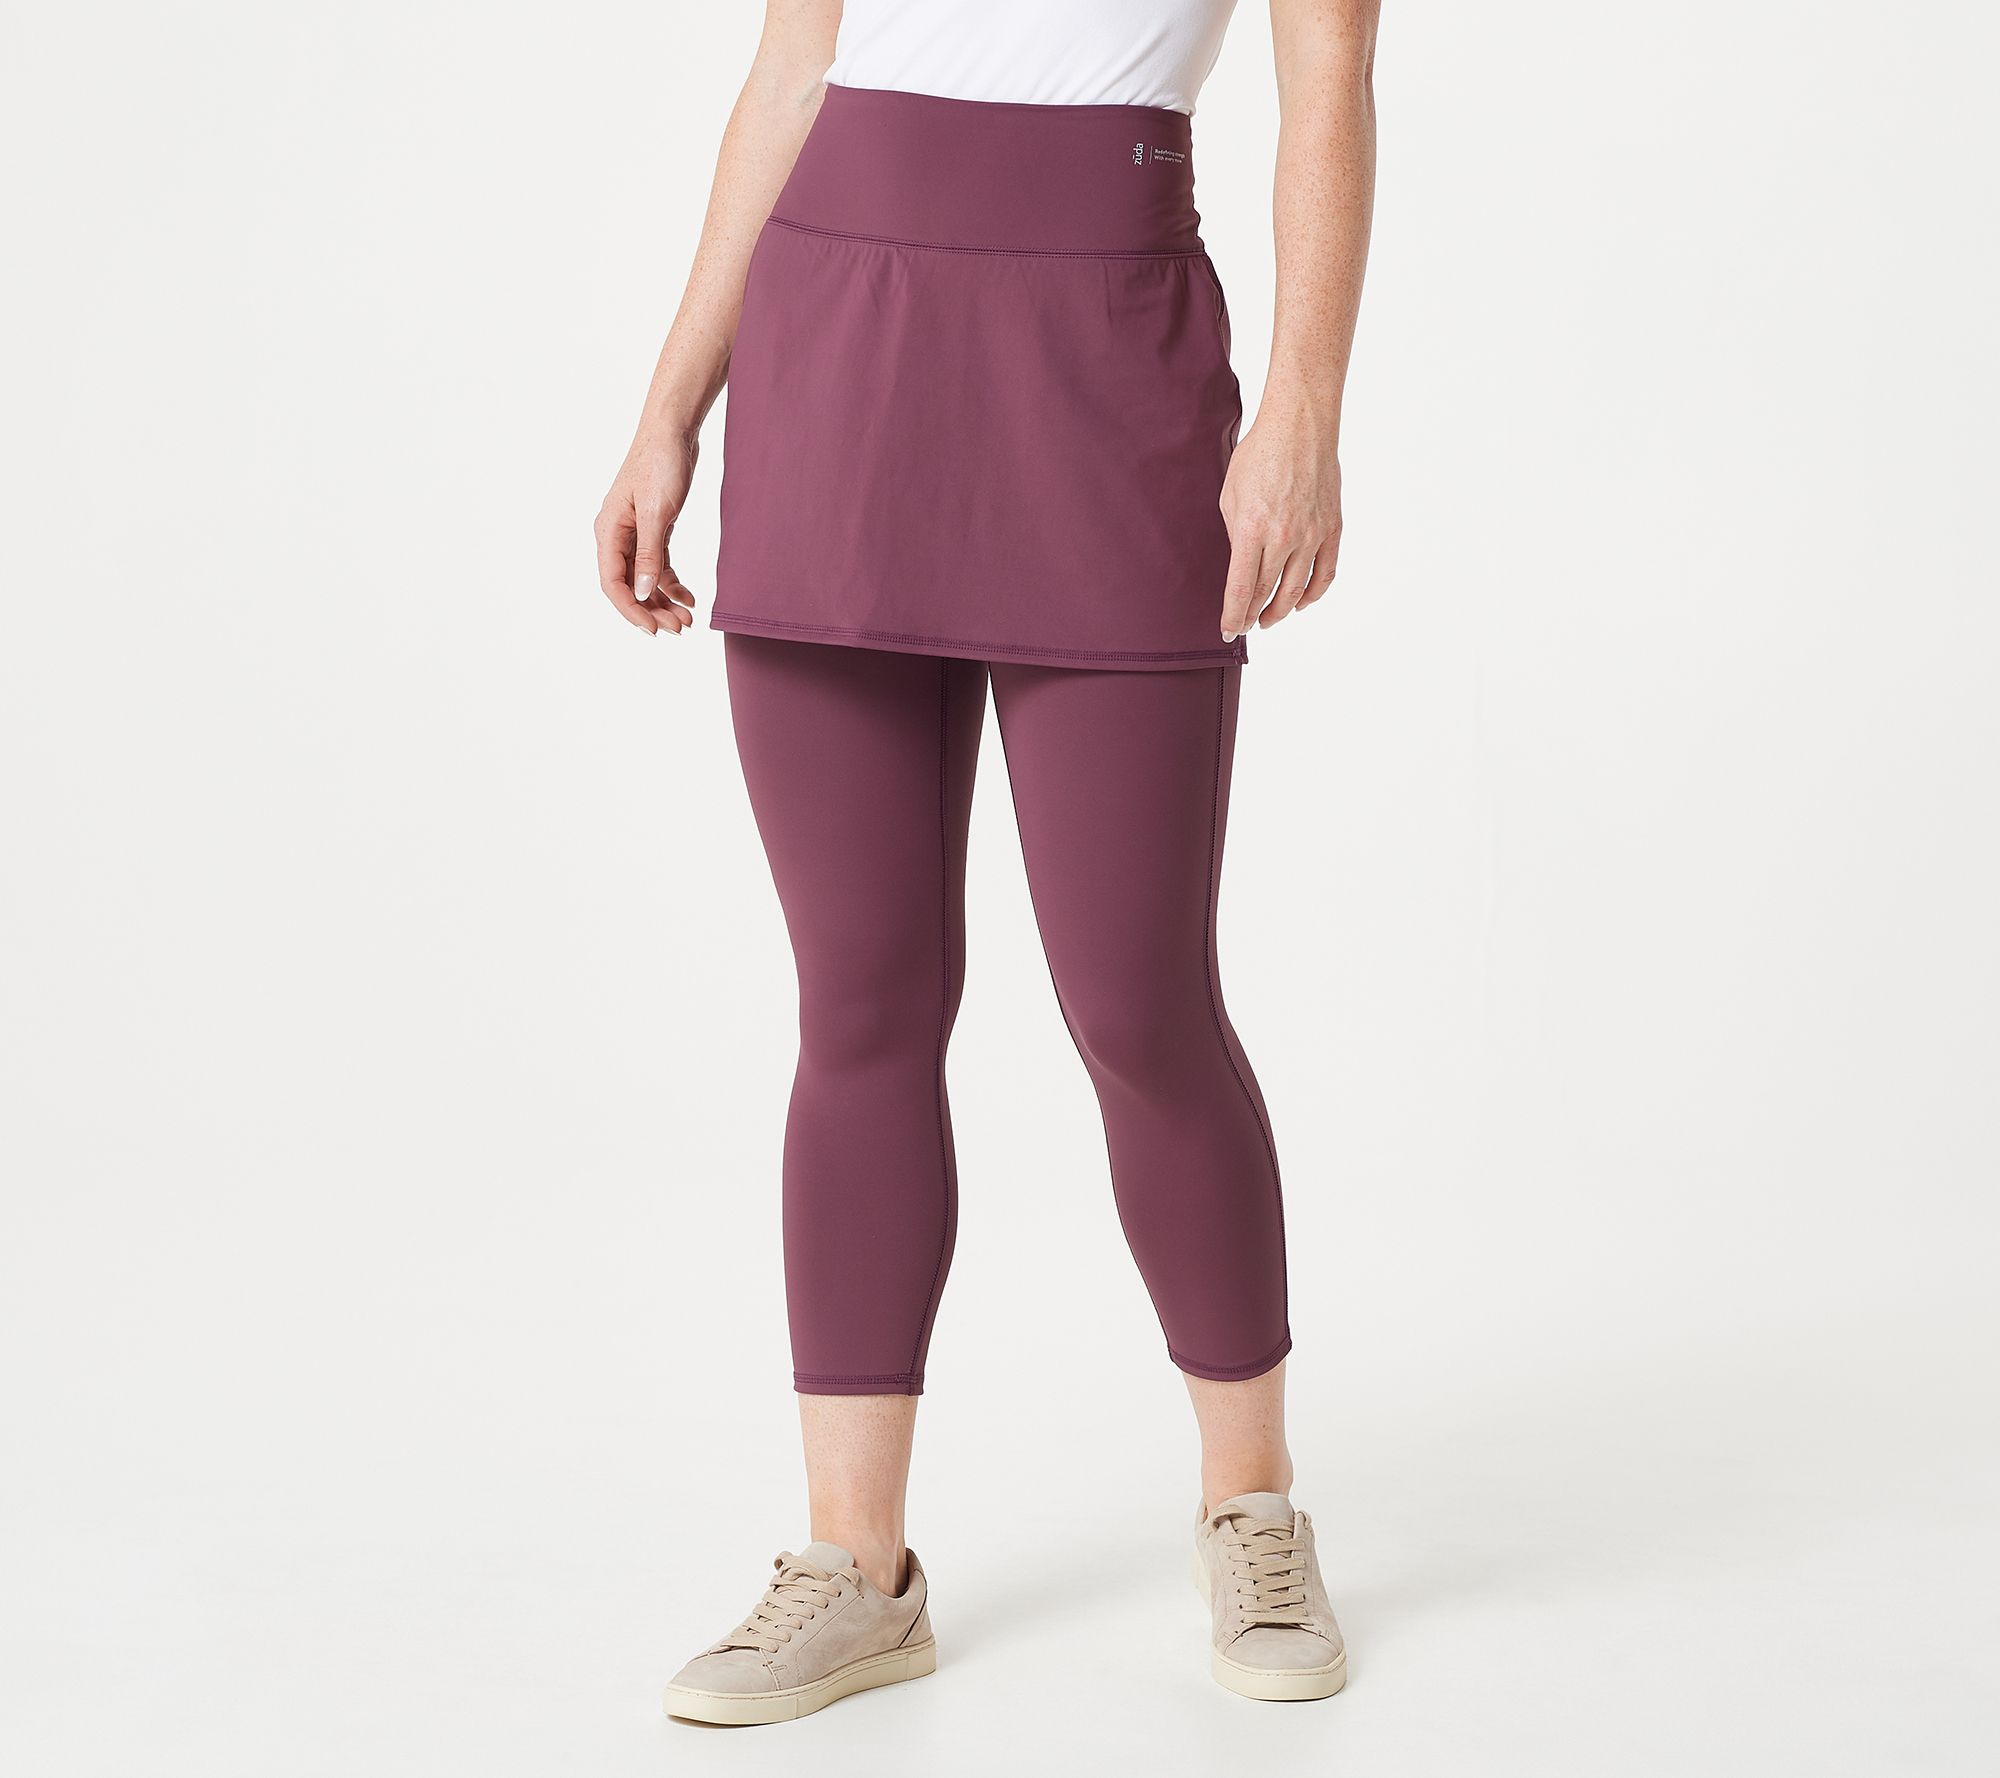 Yoga Gear: Lululemon Tight Stuff Tight Review — Laura Jean Anderson